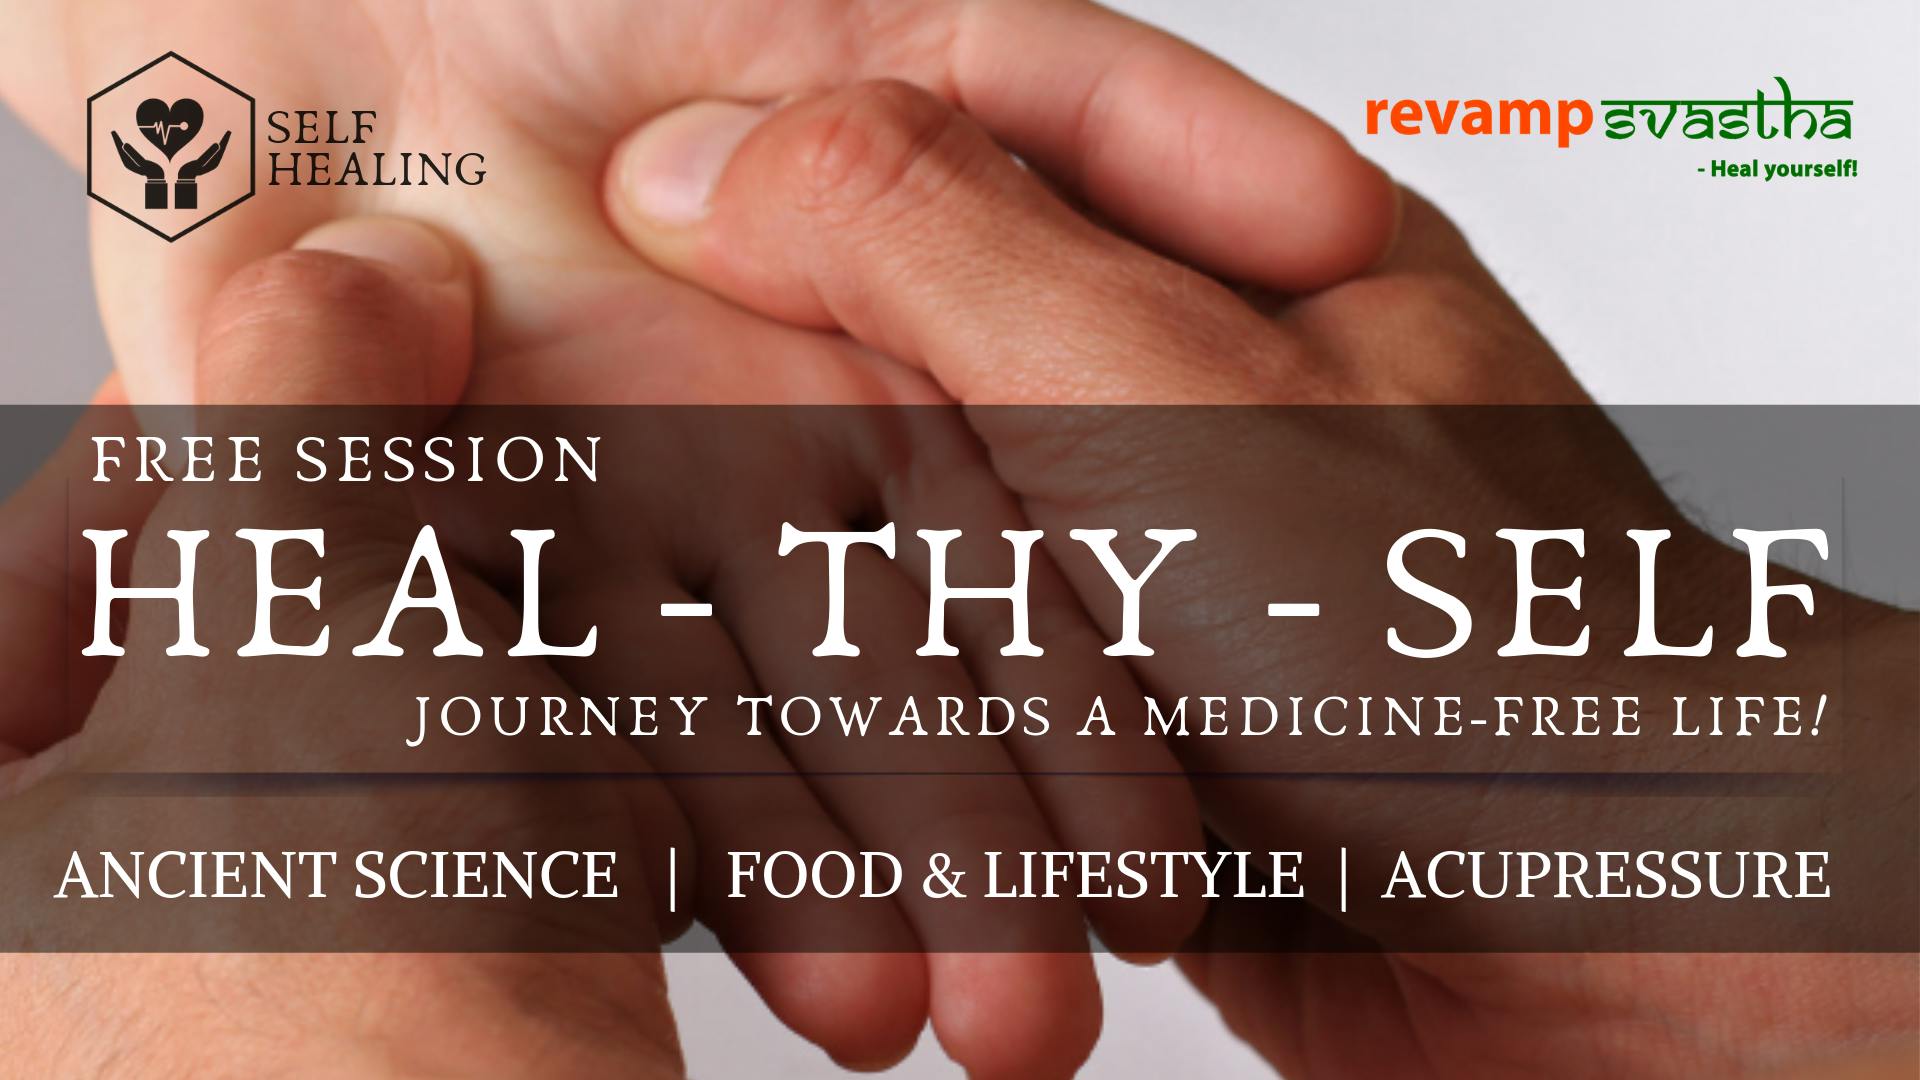 Free Session on HEAL-THY-SELF: Journey Towards a Medicine-Free Life!